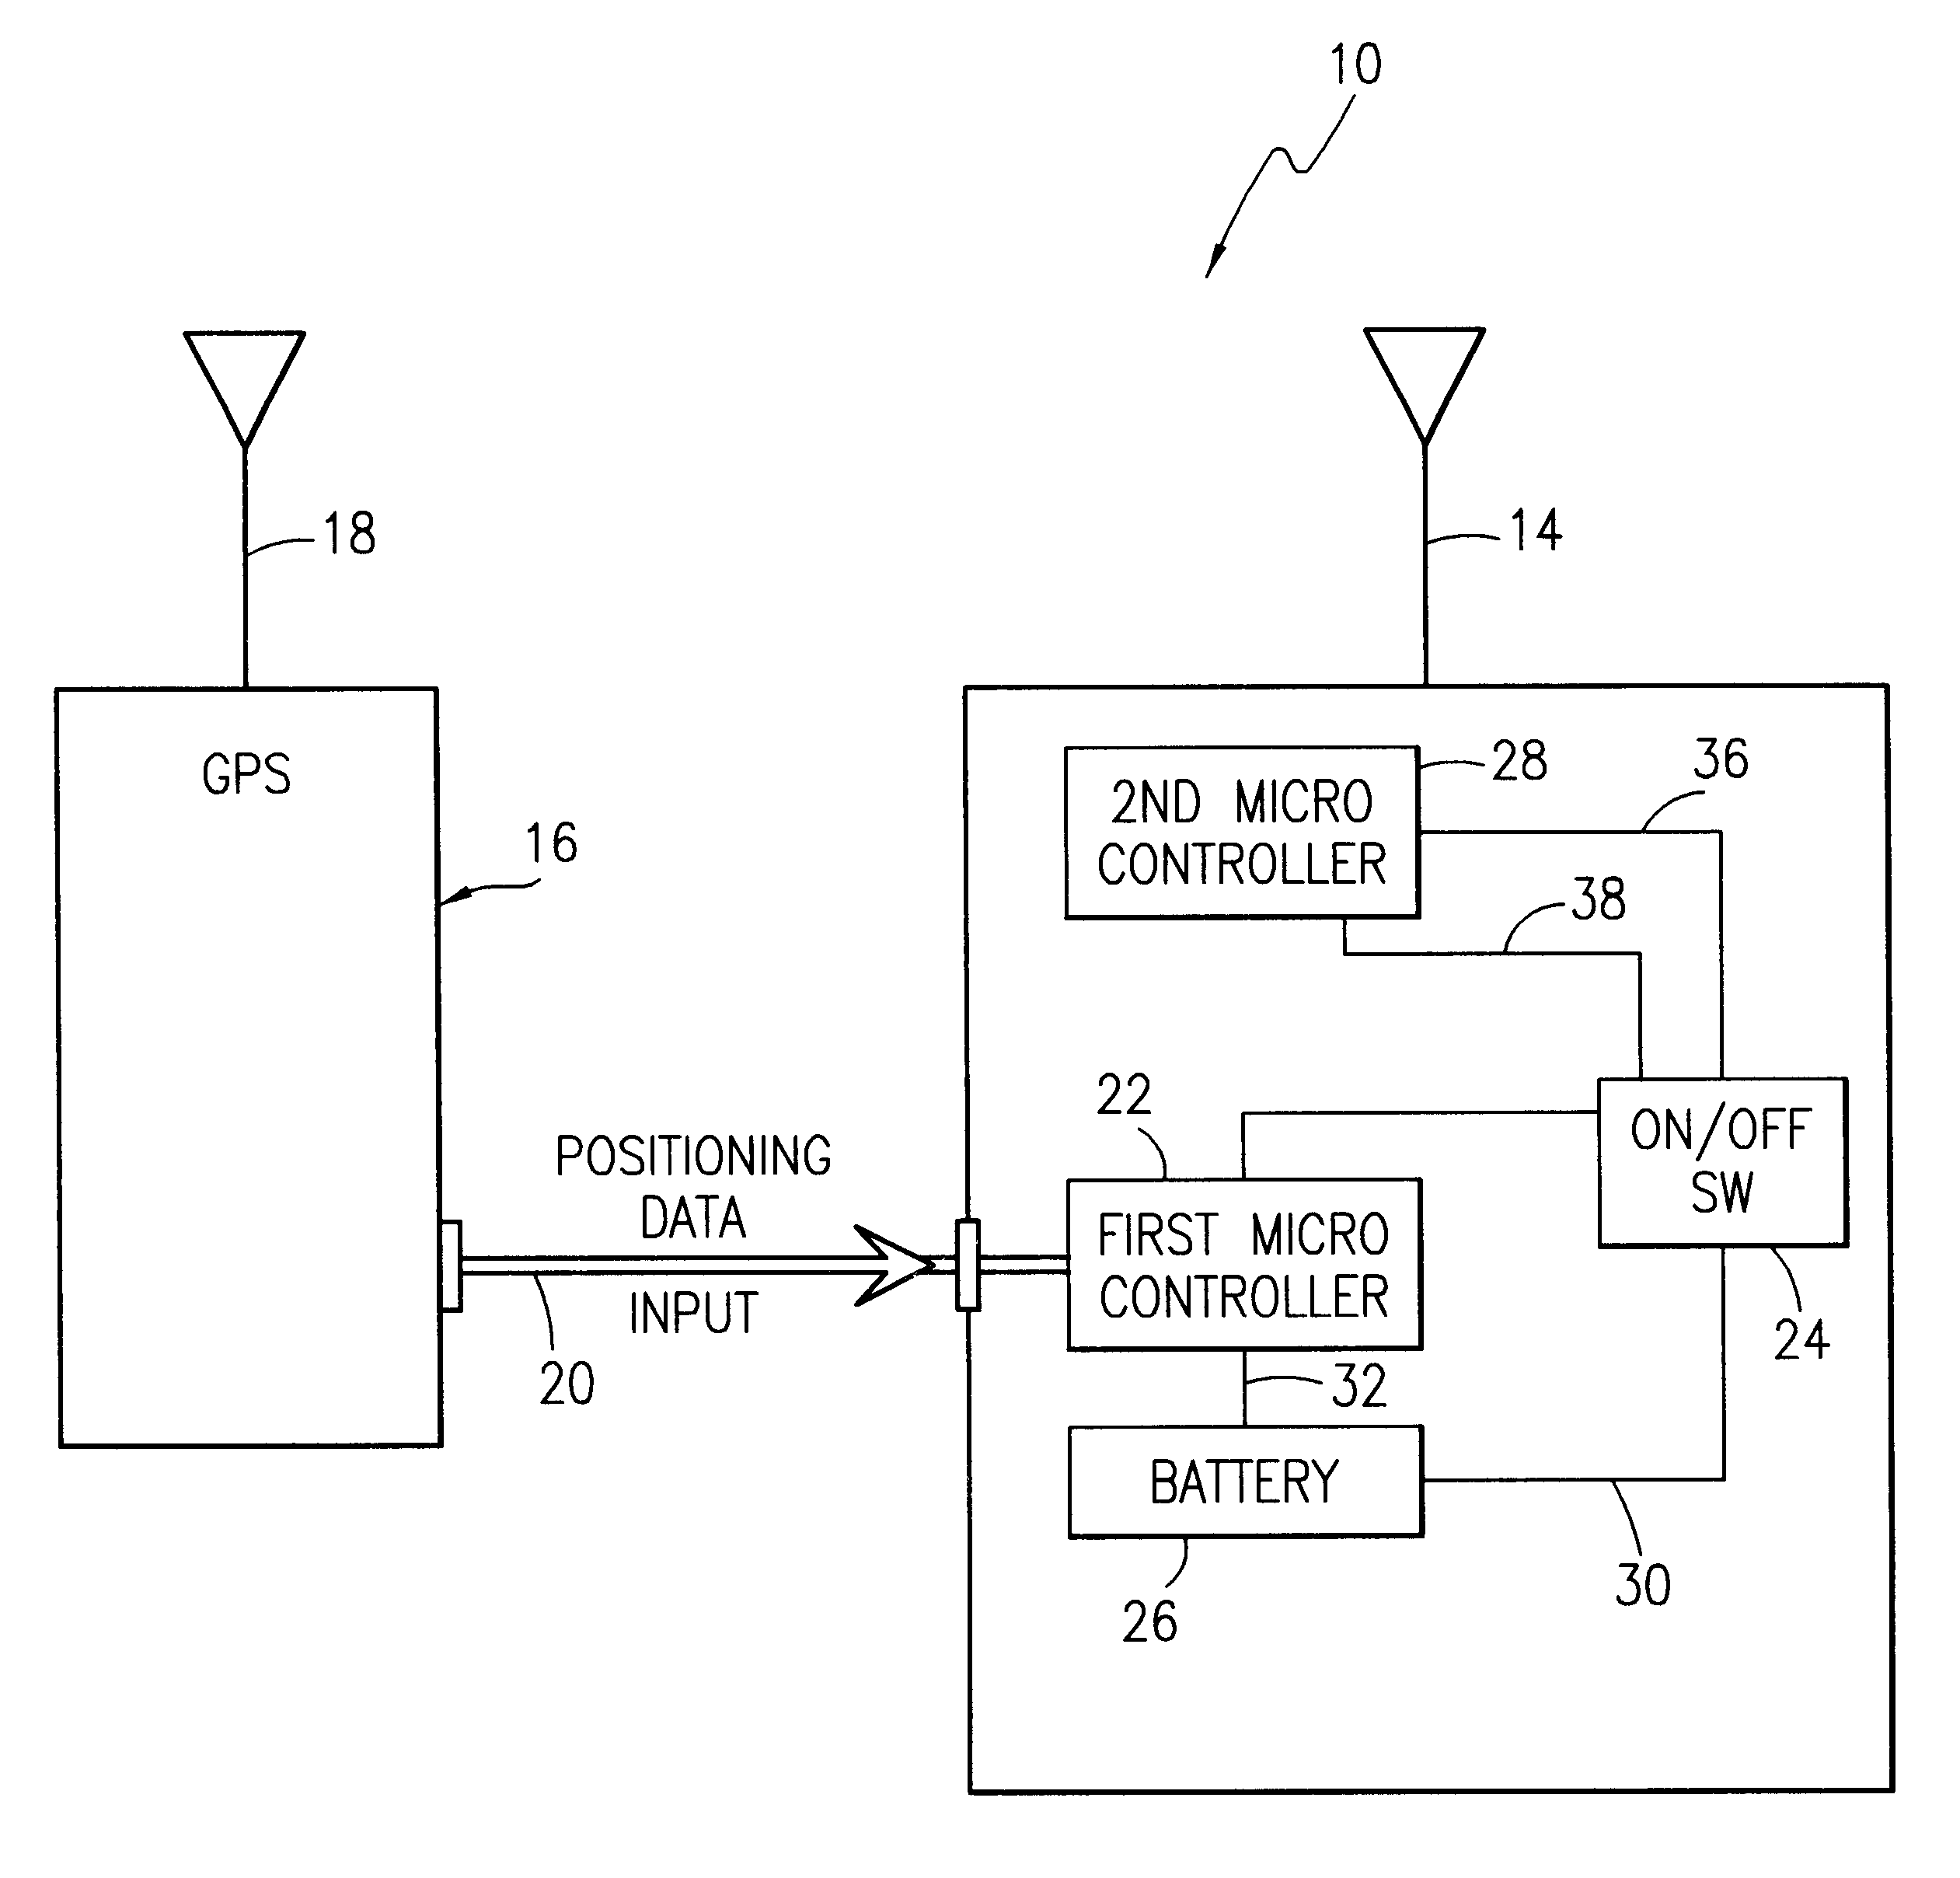 Radio beacon with a GPS interface for automatically activated EPIRBs